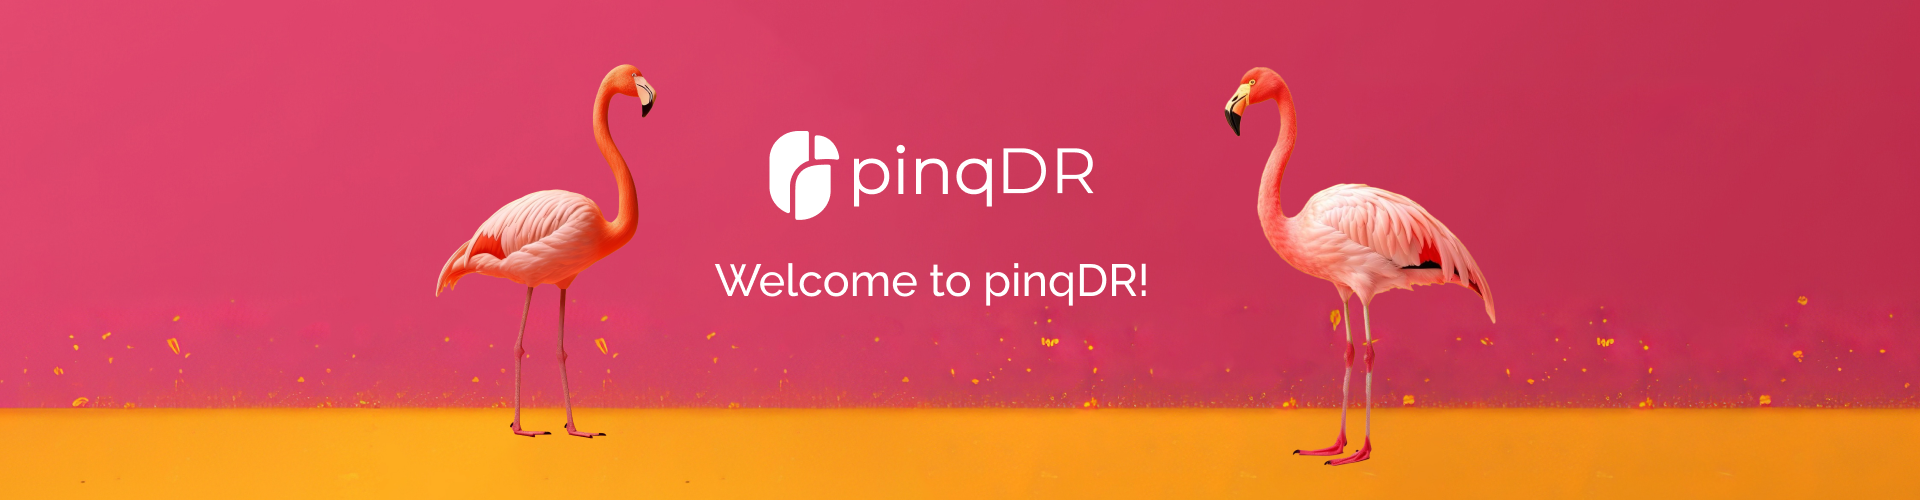 Welcome to the pinqDR project